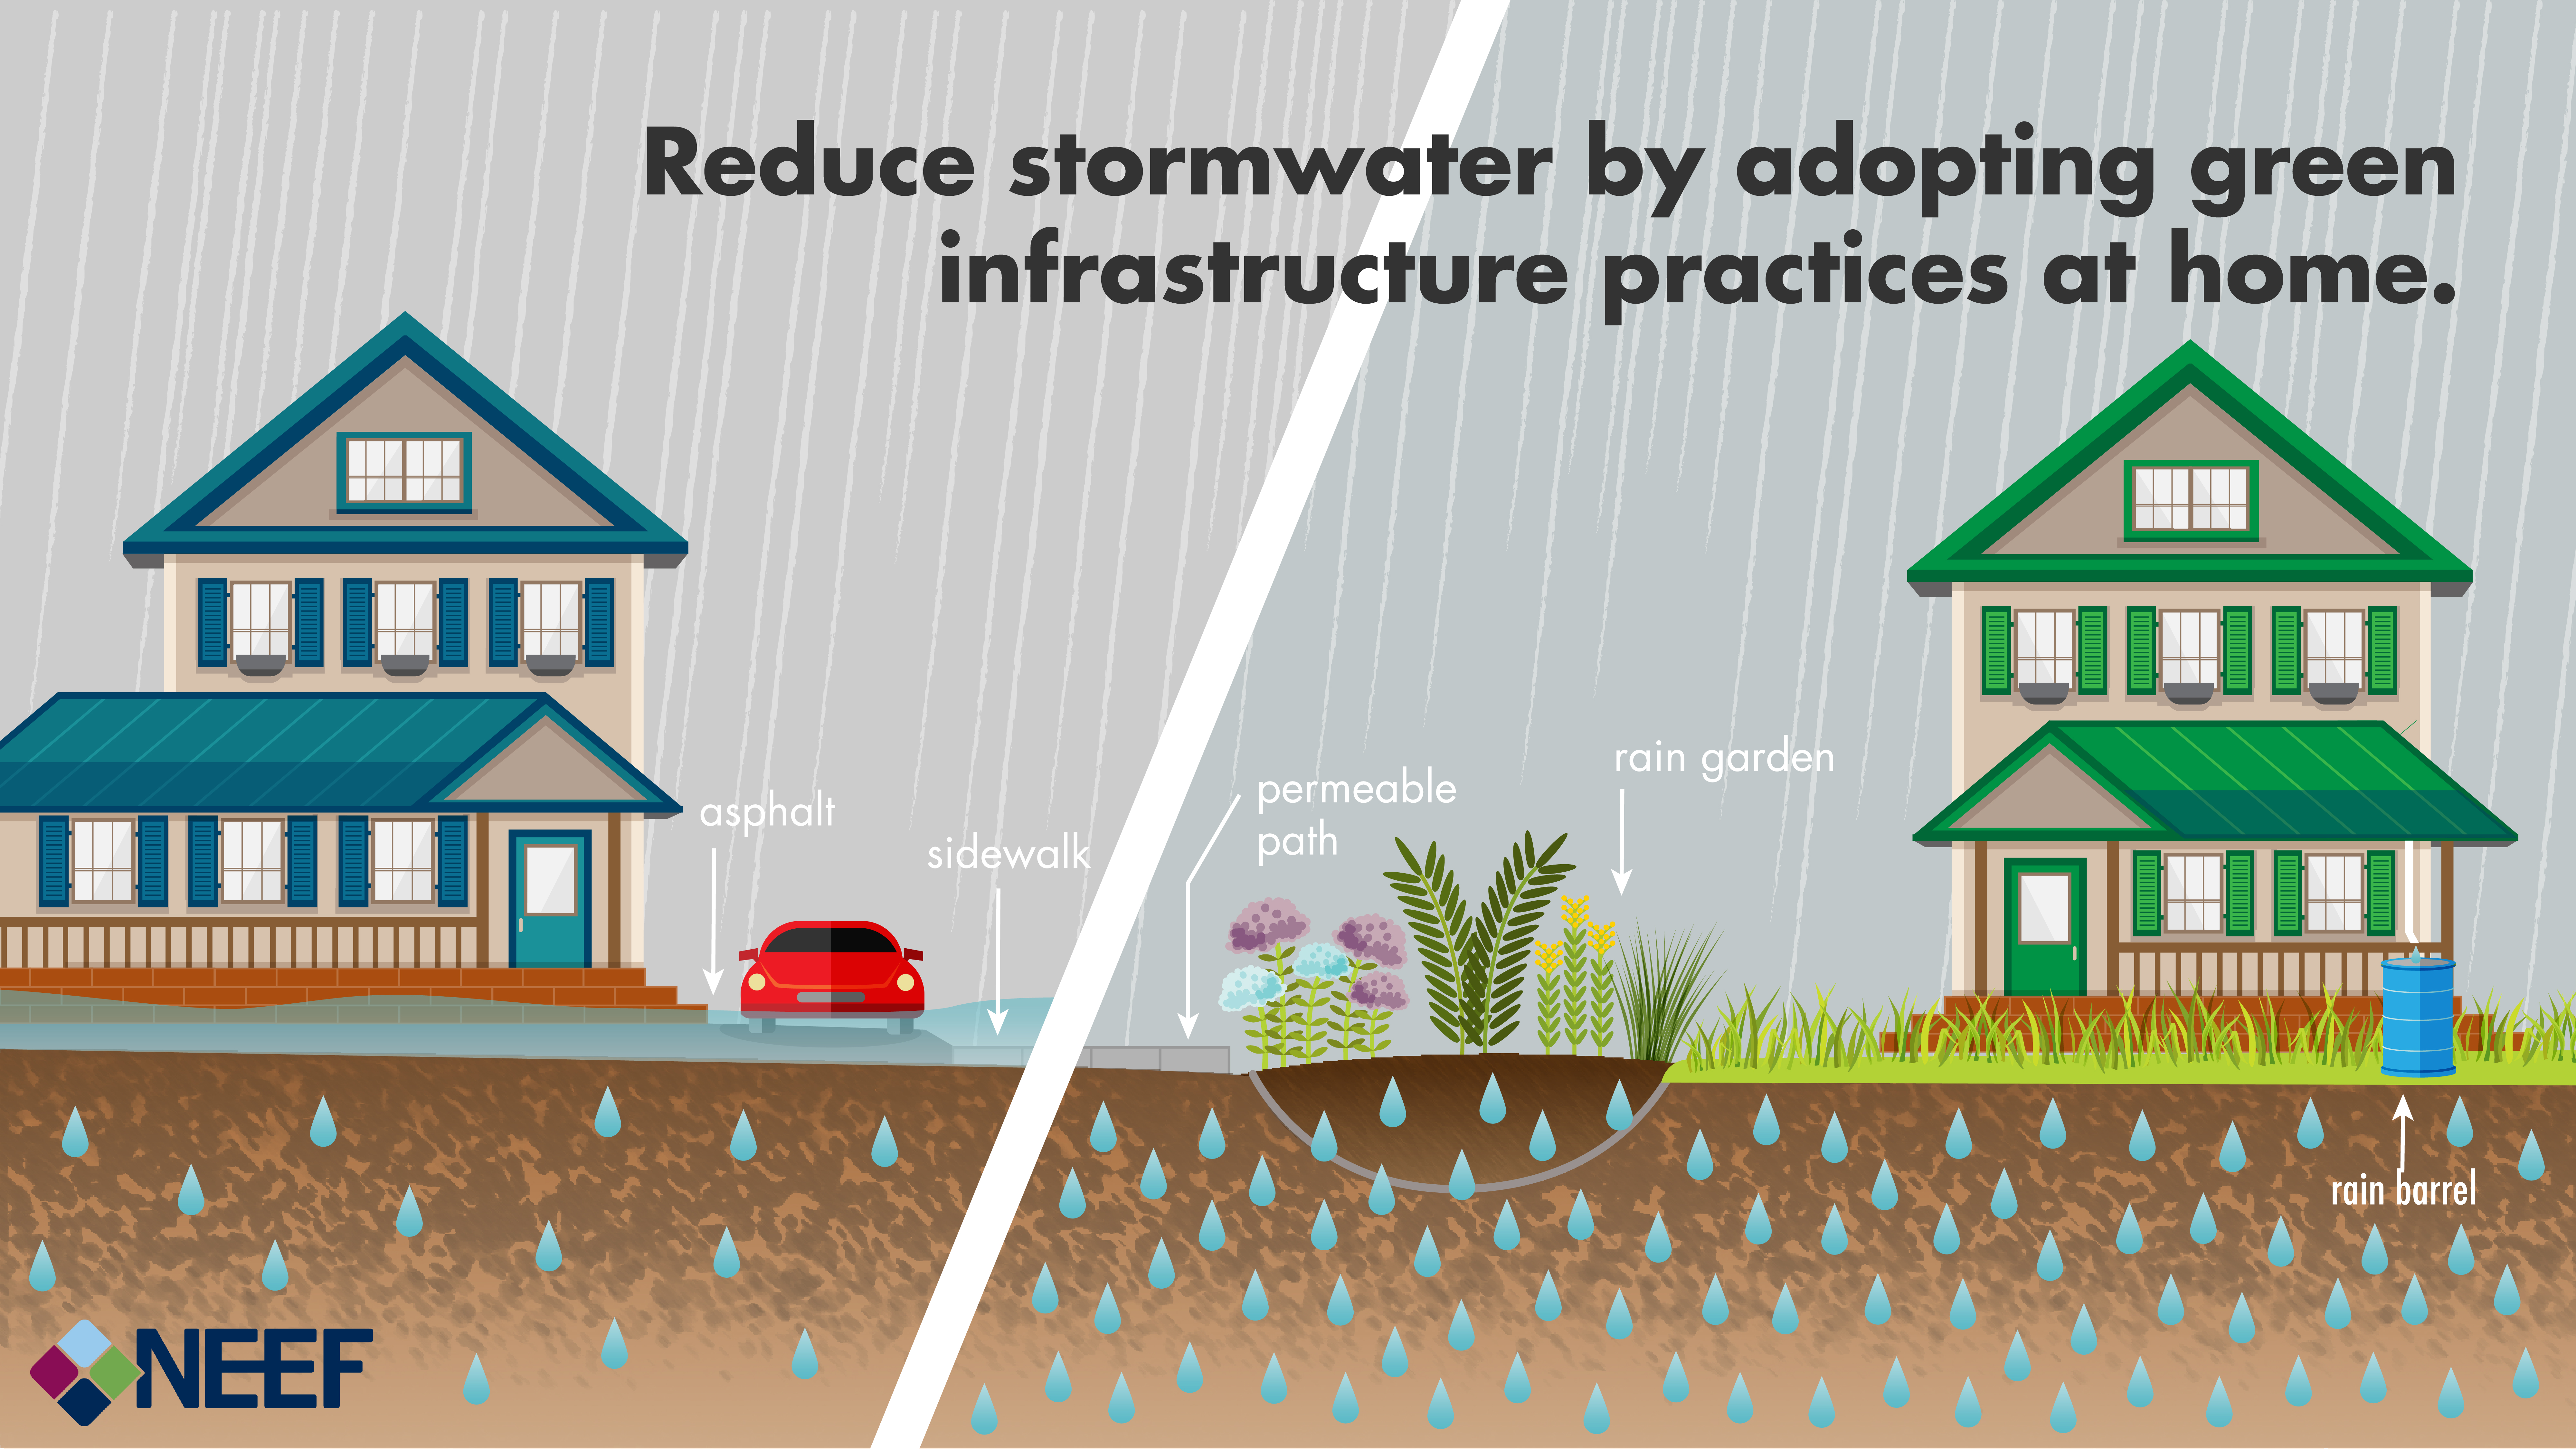 Reduce stormwater by adopting green infrastructure practices at home.